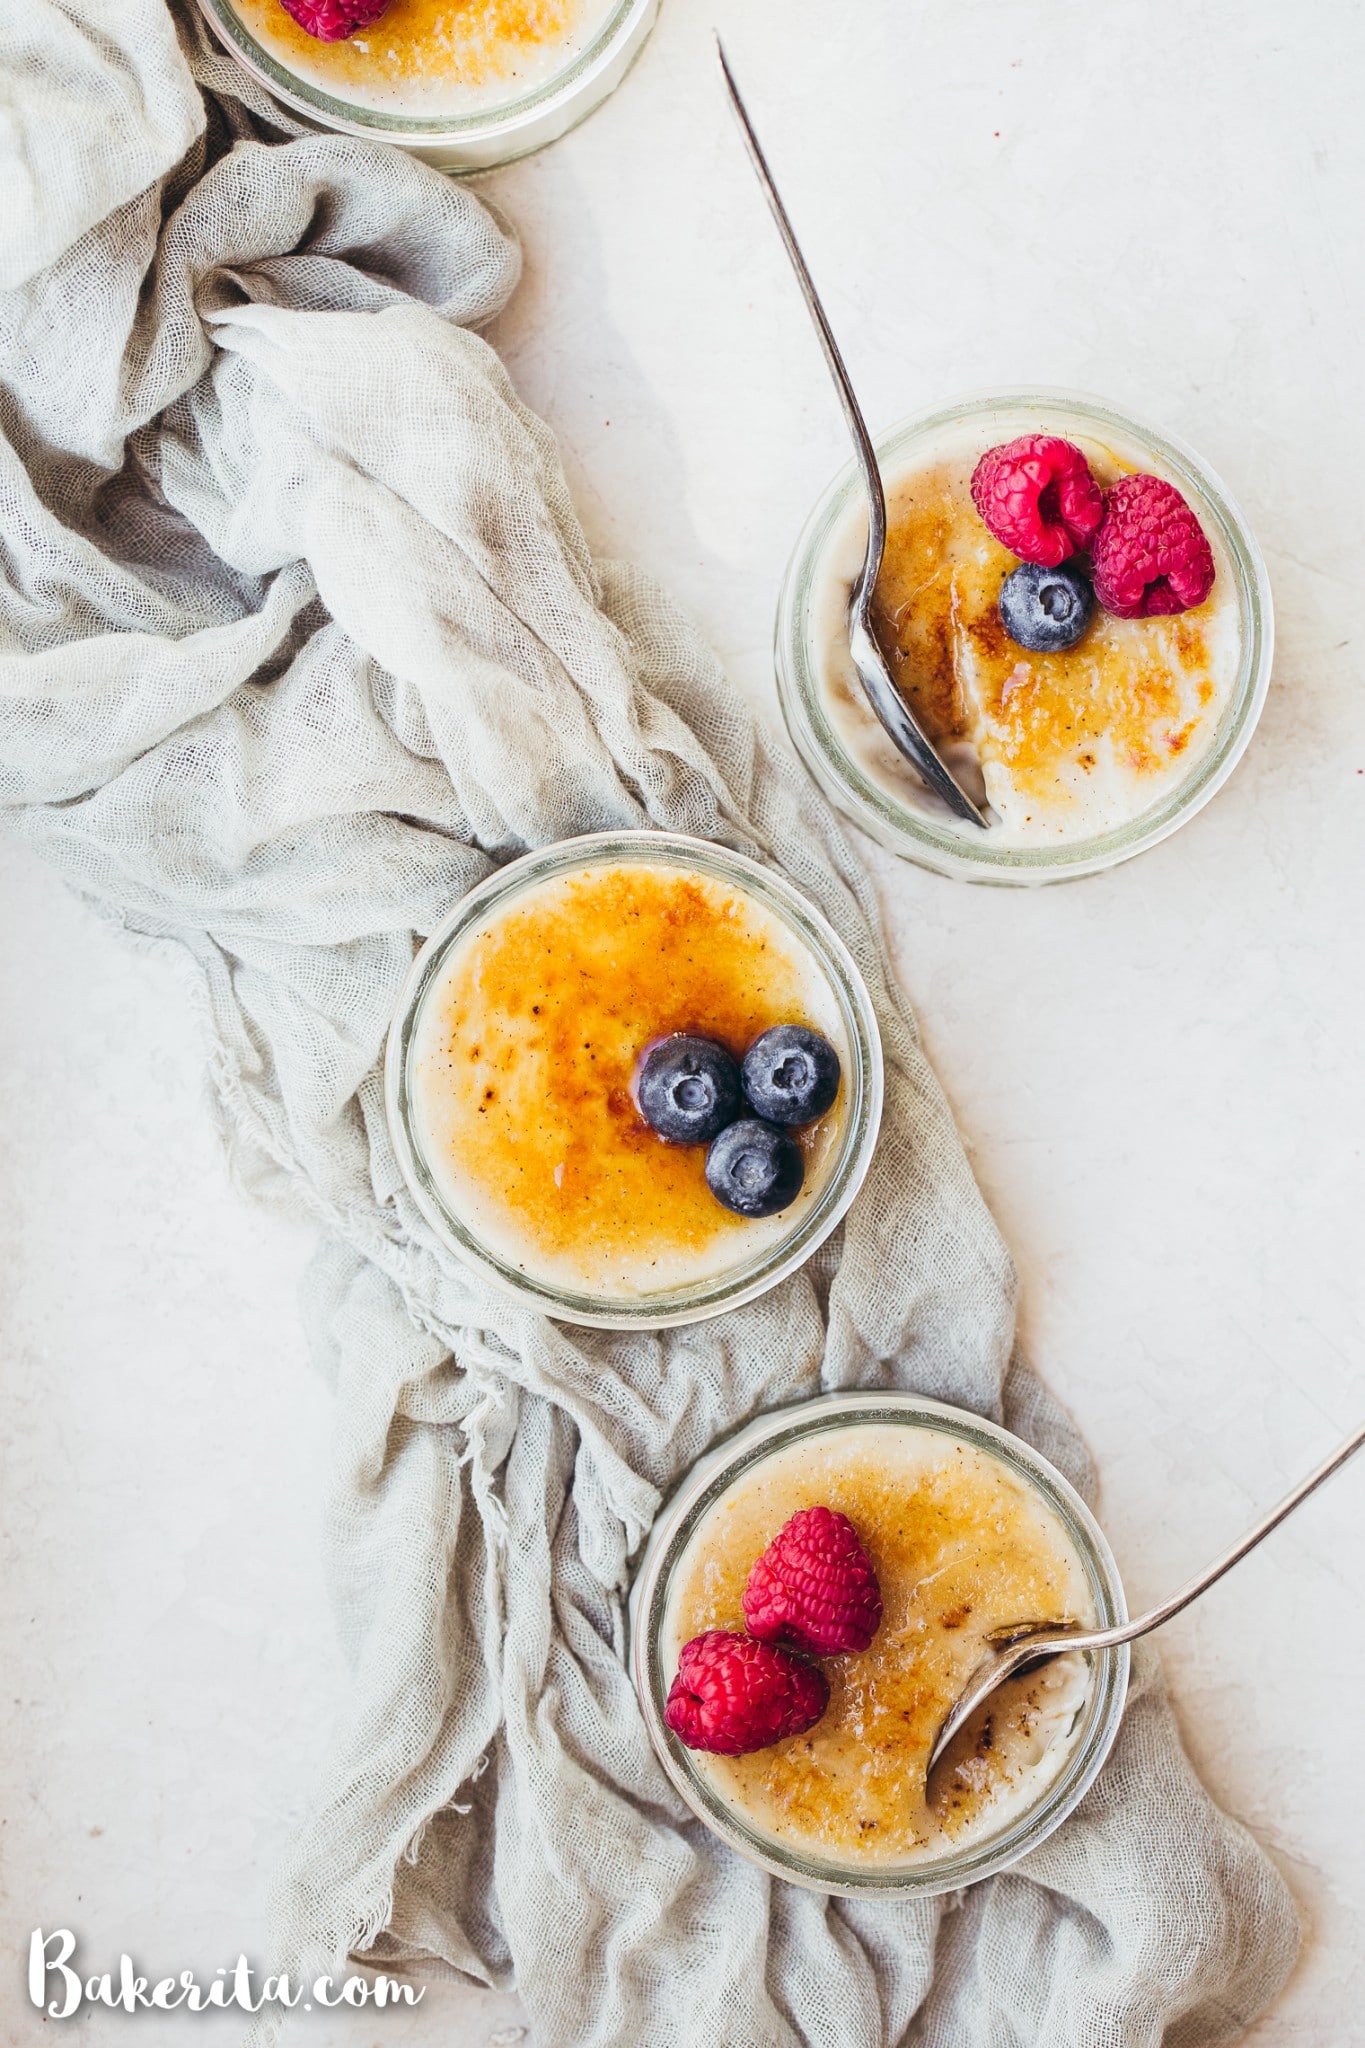 This Vegan Creme Brulee is a twist on the traditional French dessert that translates to "burnt cream". By using coconut milk and all-natural sweeteners, we make a paleo and vegan version of this classic dessert.